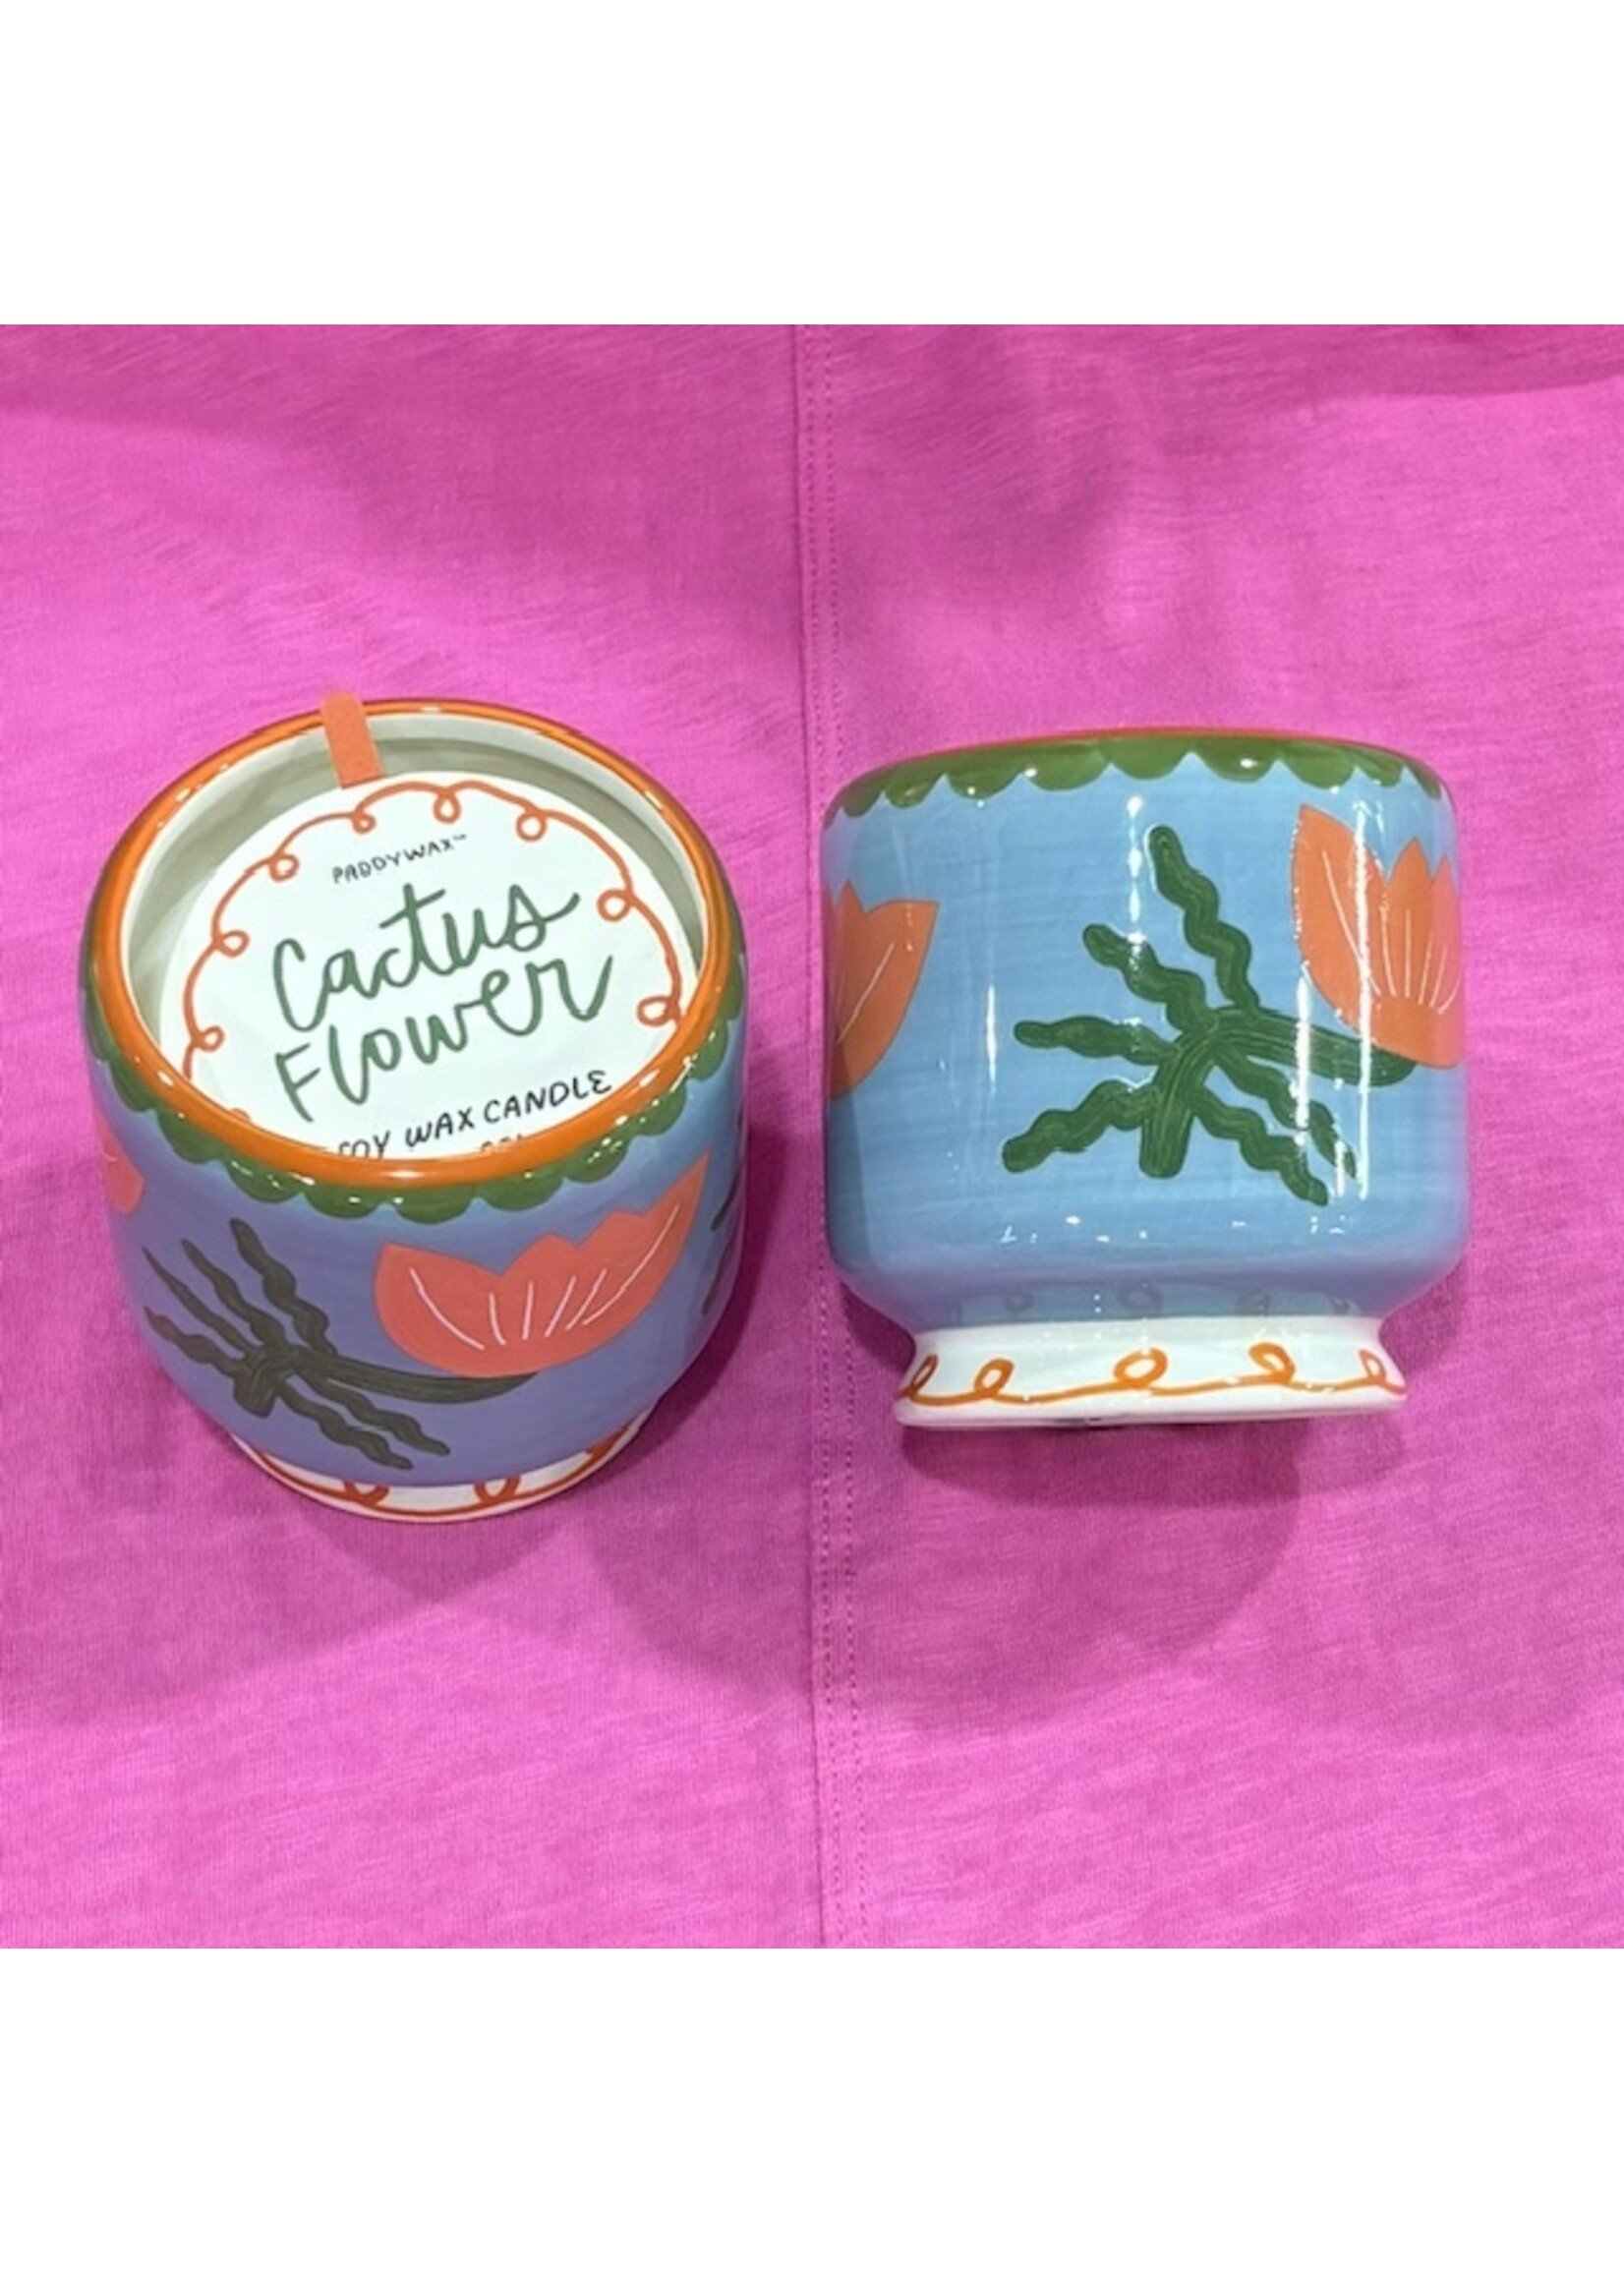 Paddywax Paddywax Handpainted Ceramic Candle